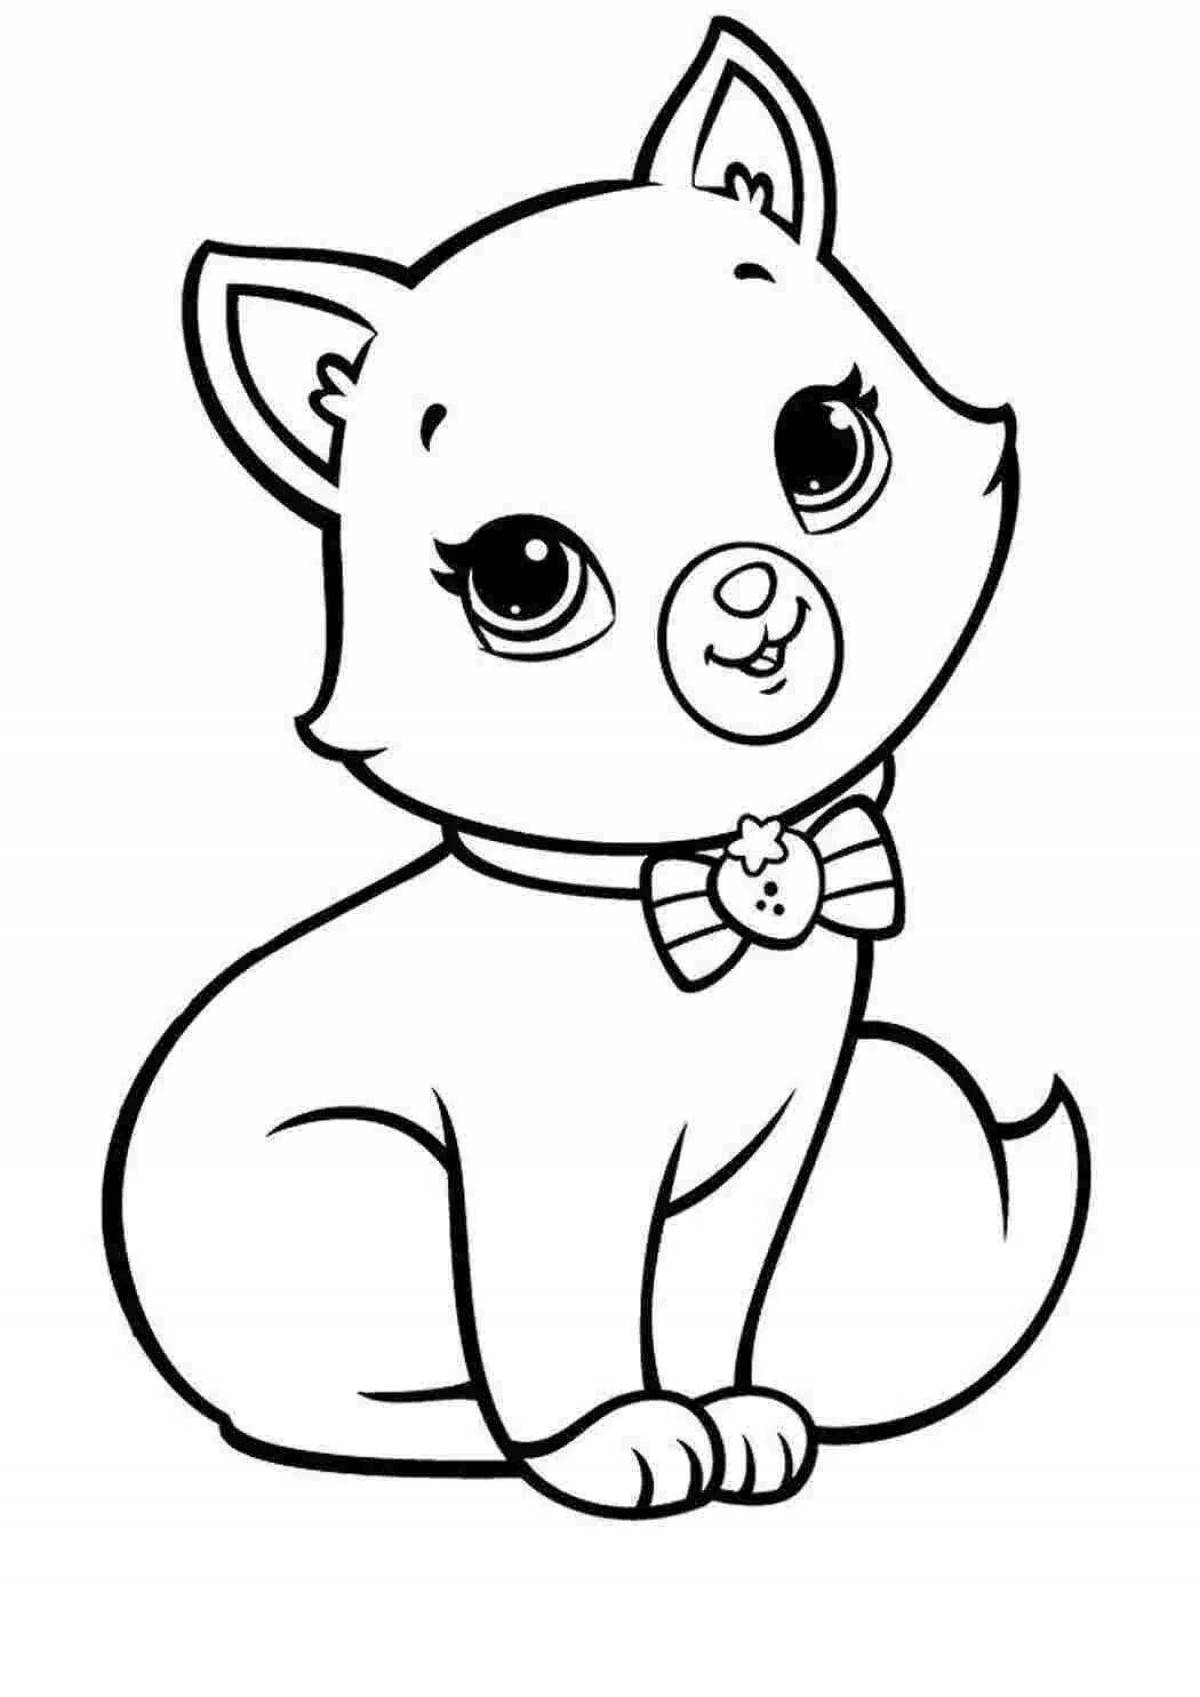 Snuggly coloring page kitten husky